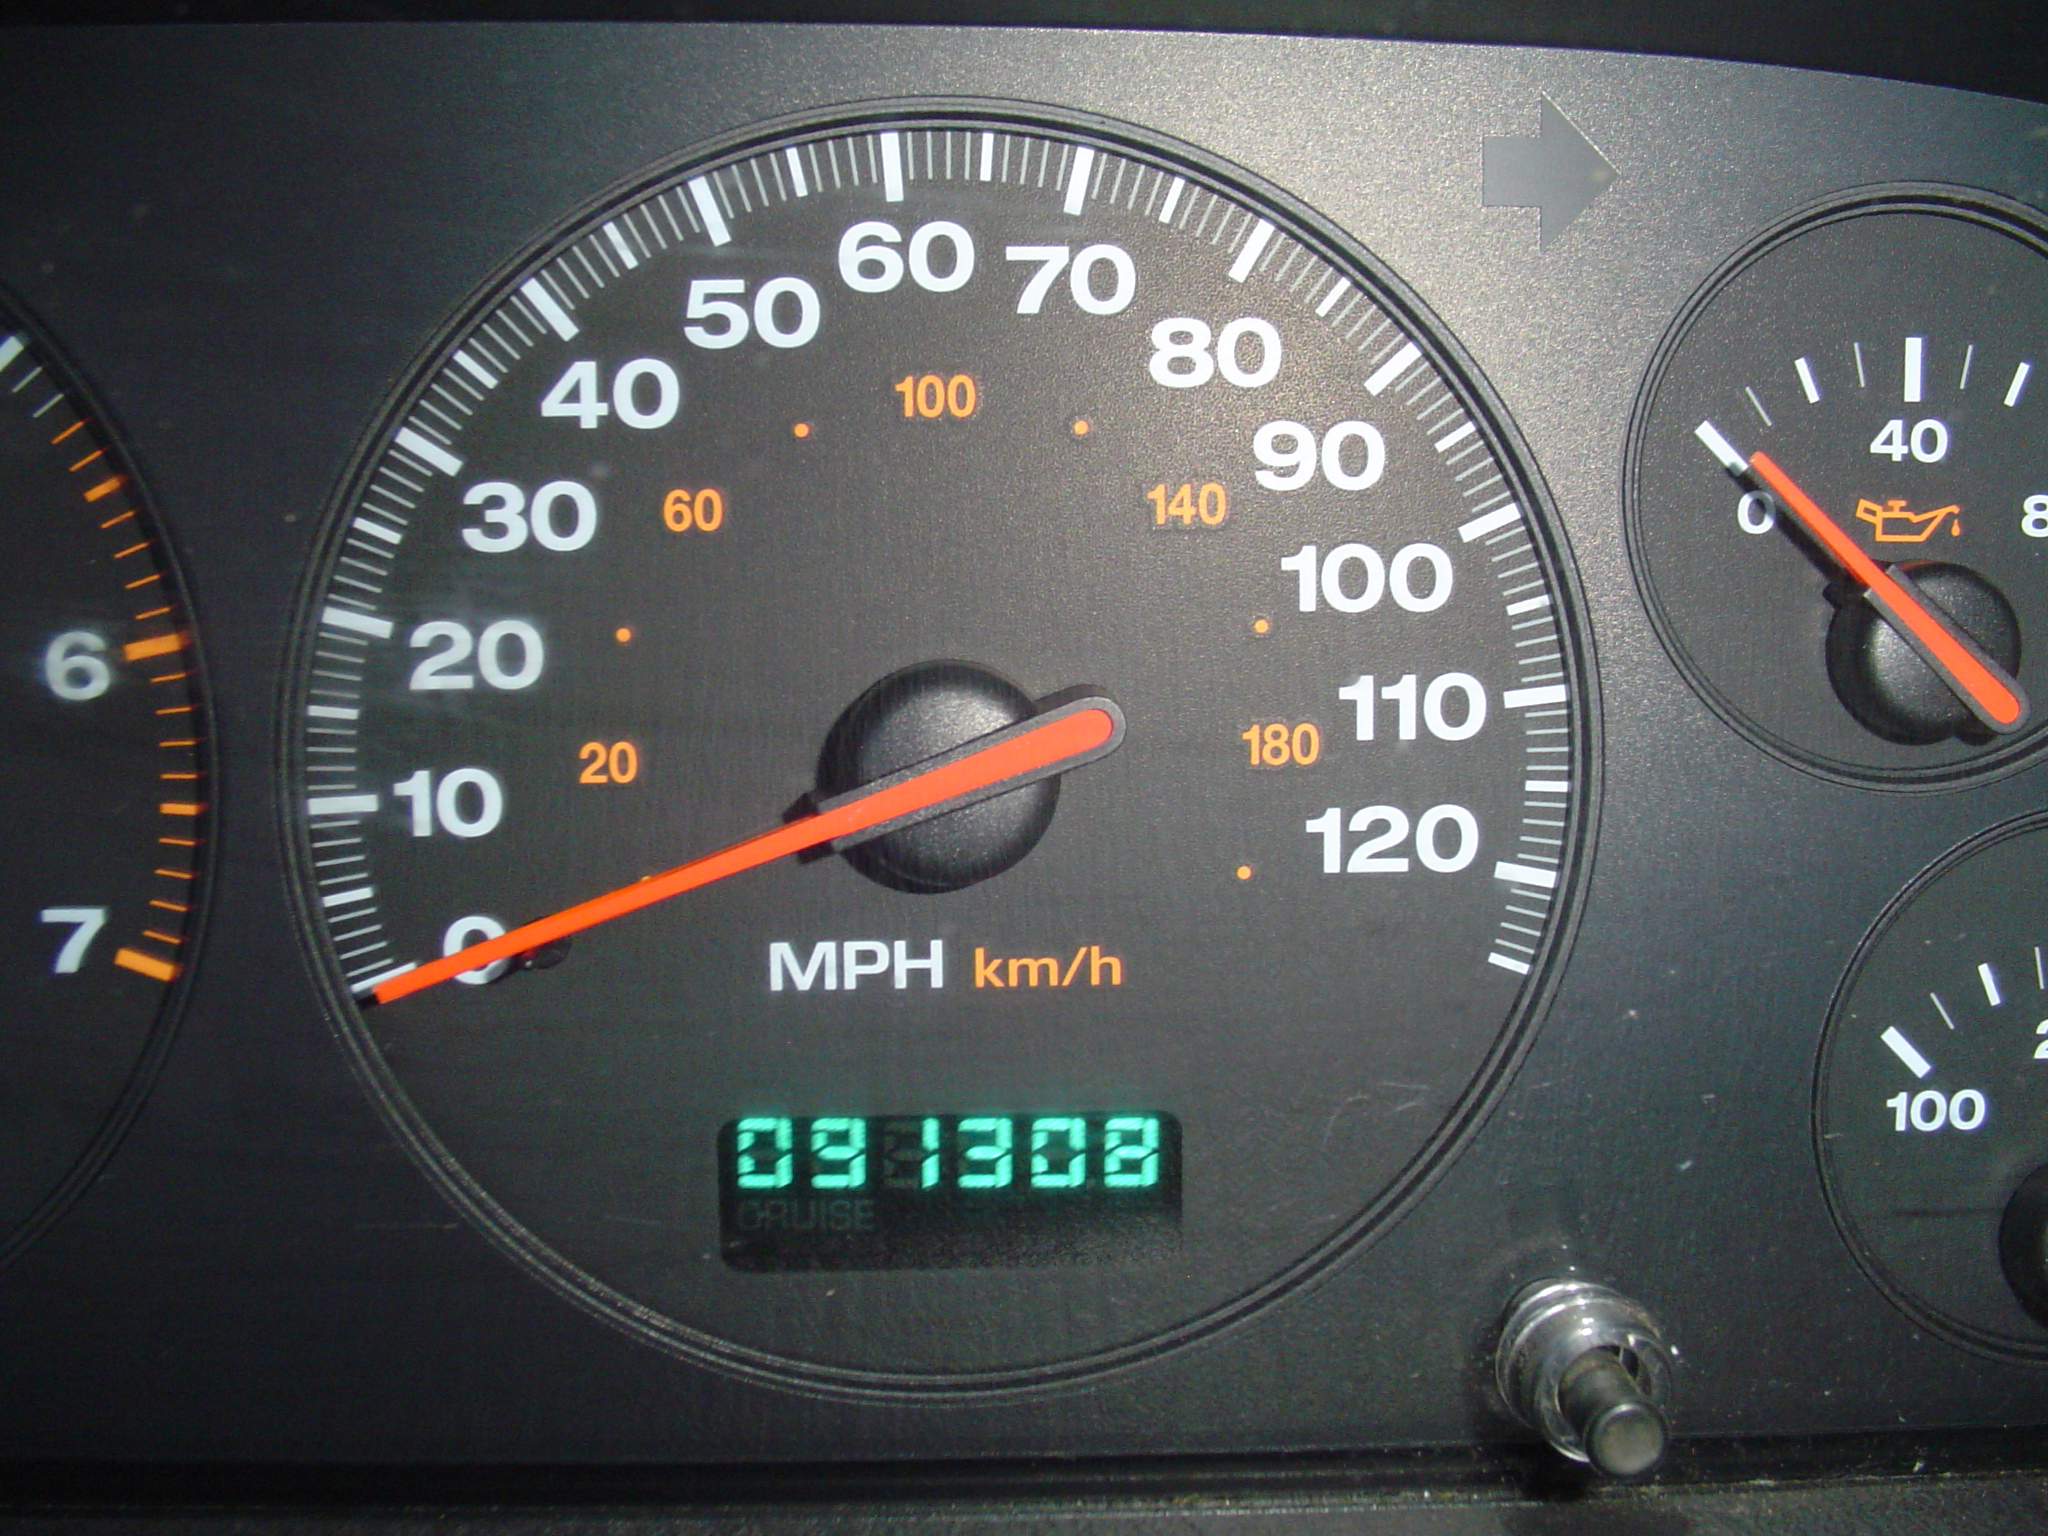 a device that records the distance traveled by a vehicle